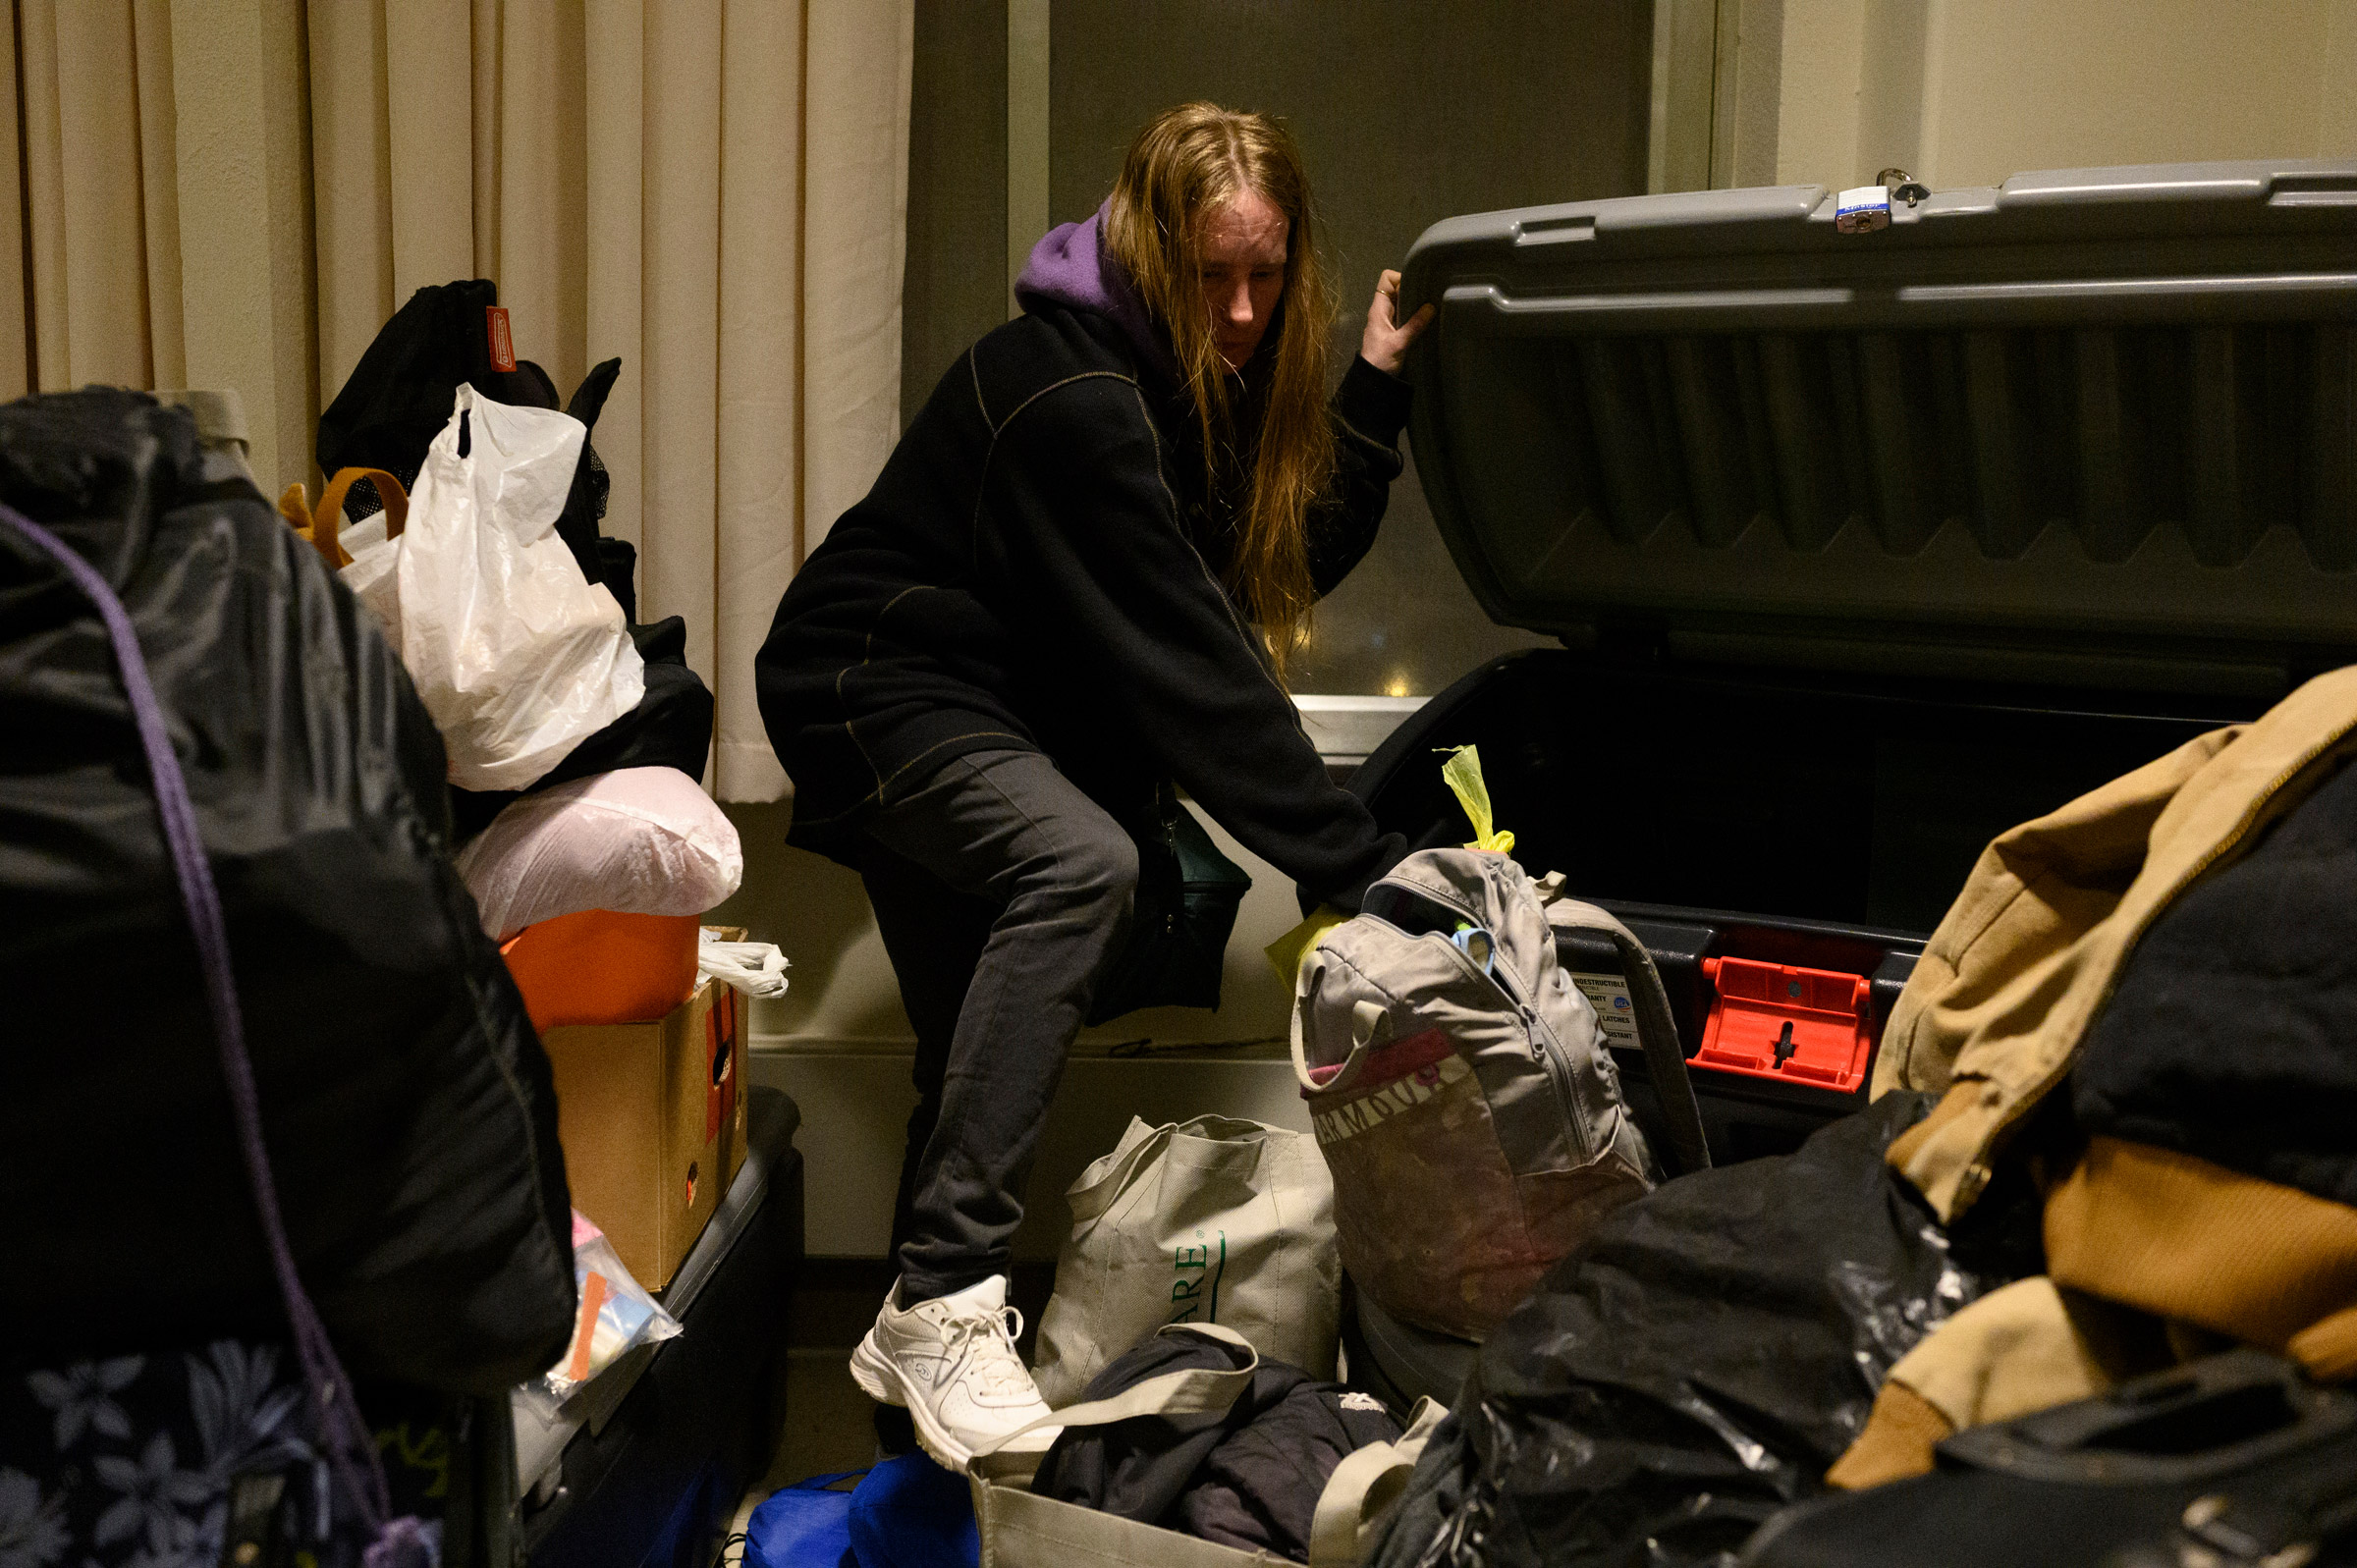 Dylon collects belongings that she has stored at the Winter Freeze shelter on its final night of operation for the year in Wheeling, WV on December 15, 2021.